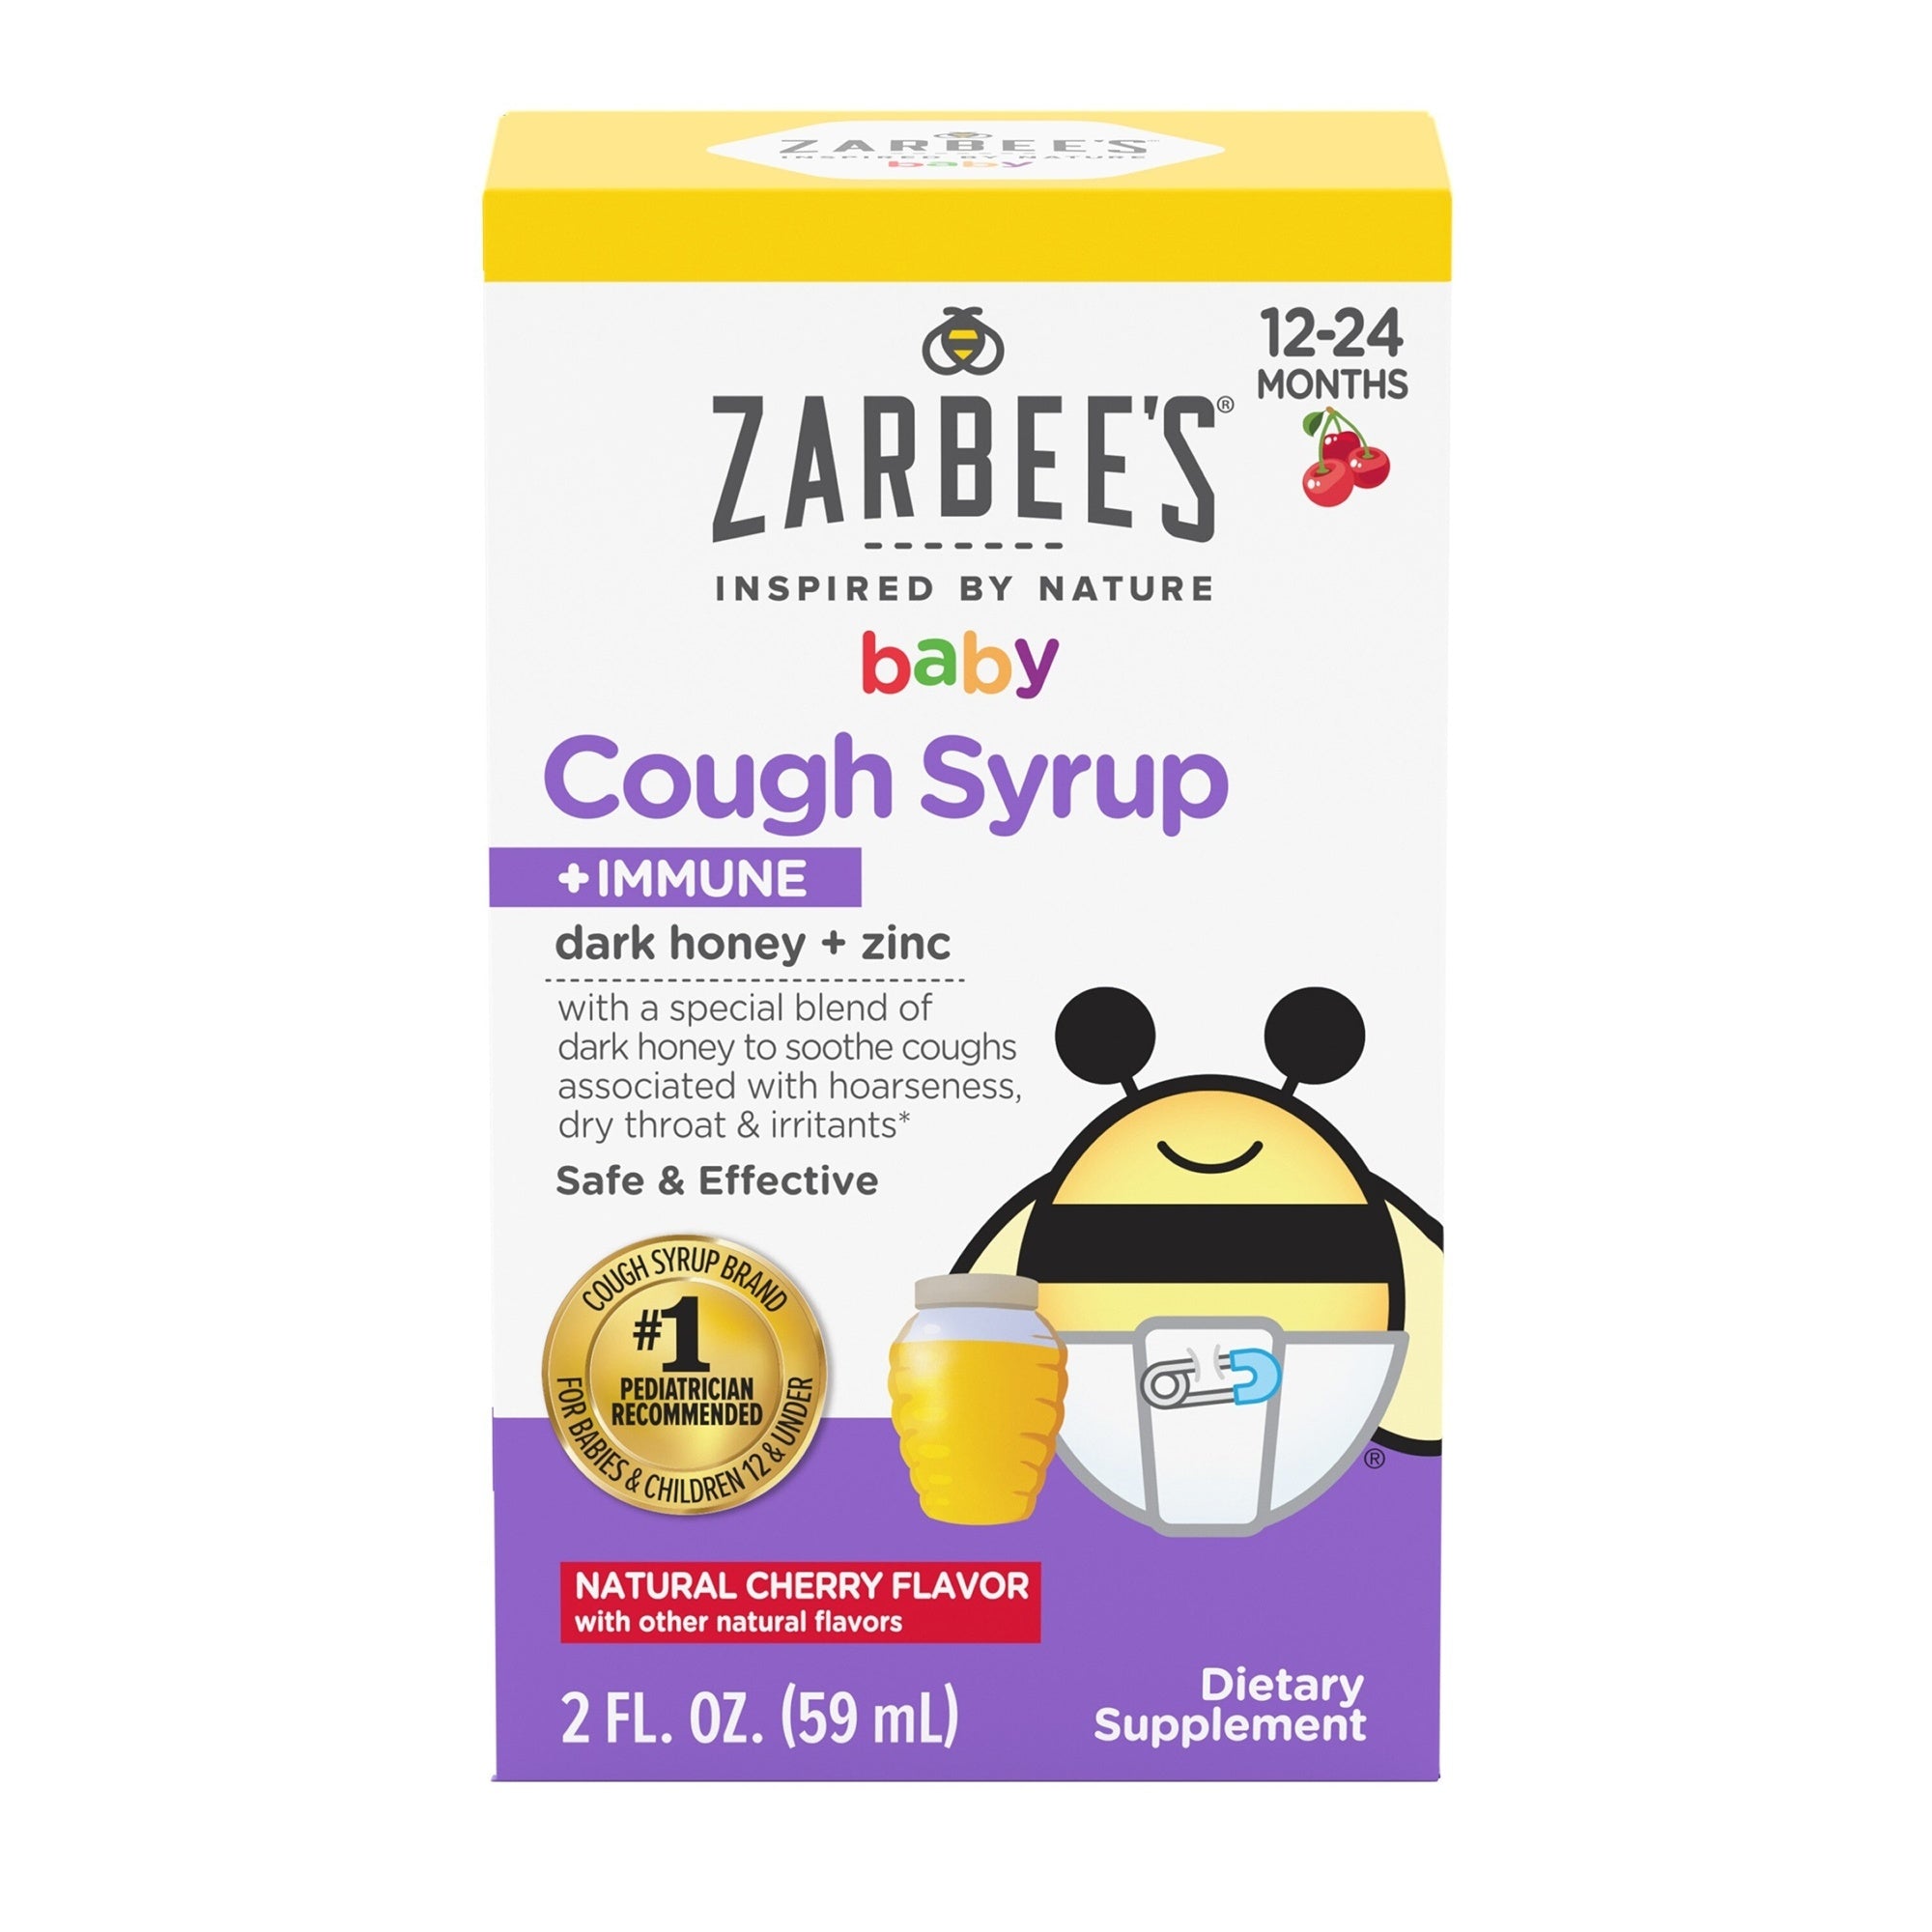 Cough Syrup - 12 to 24 months